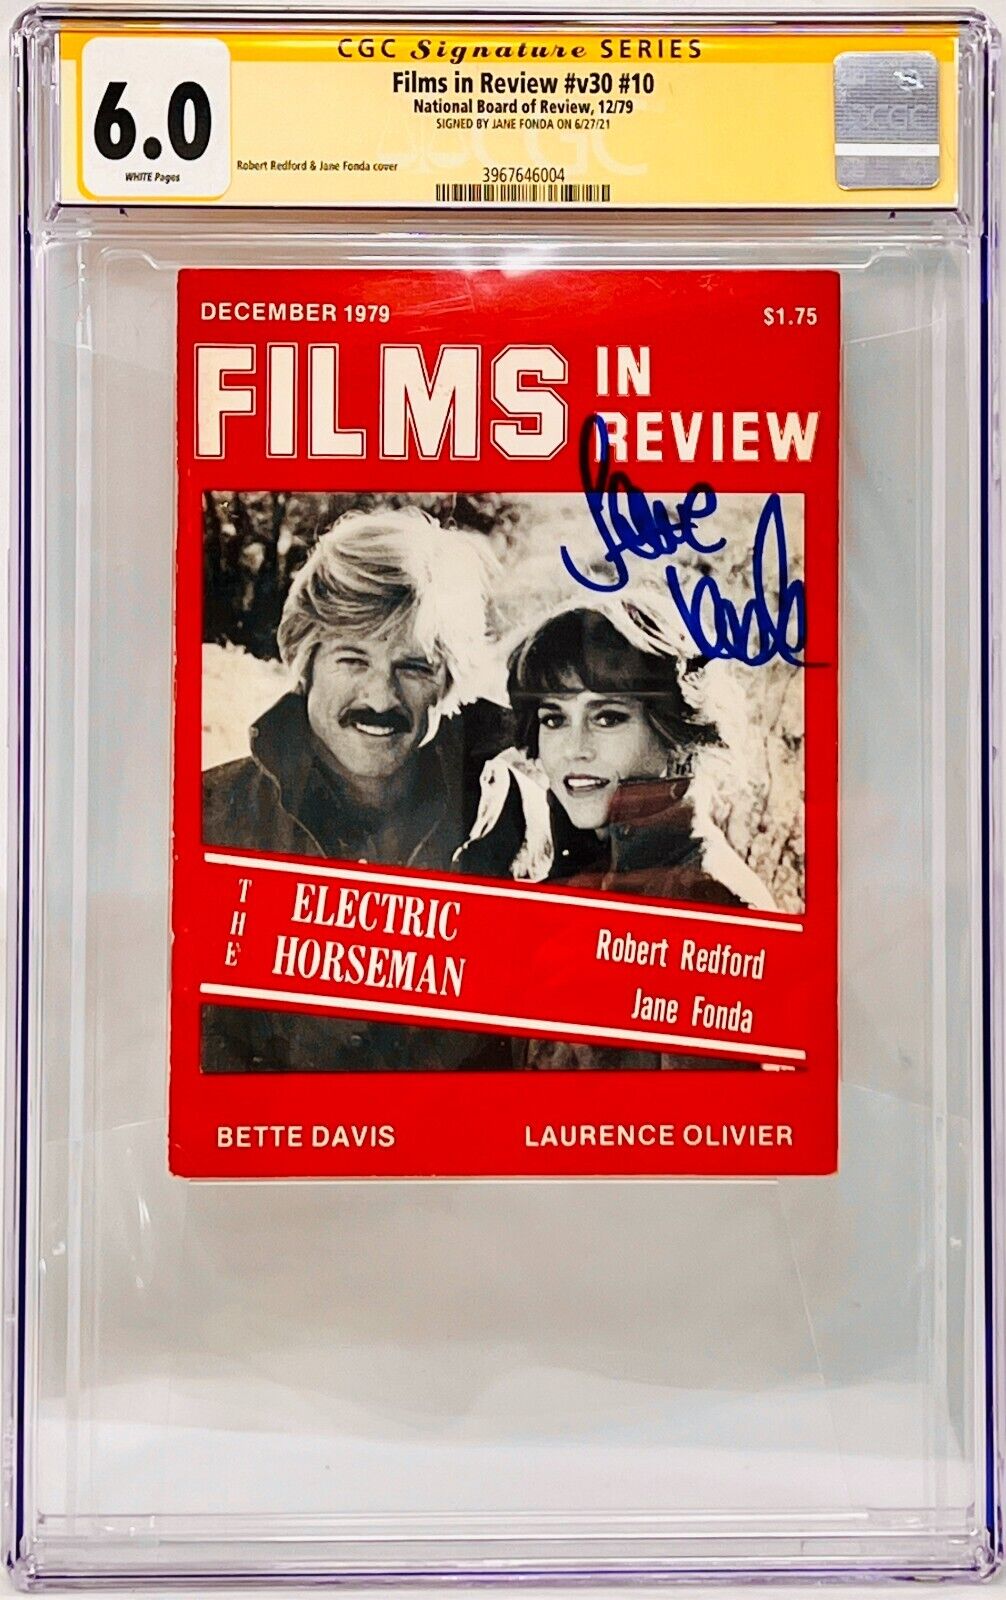 Films In Review #v30 #10 CGC Signature Series Graded 6.0 Signed by Jane Fonda